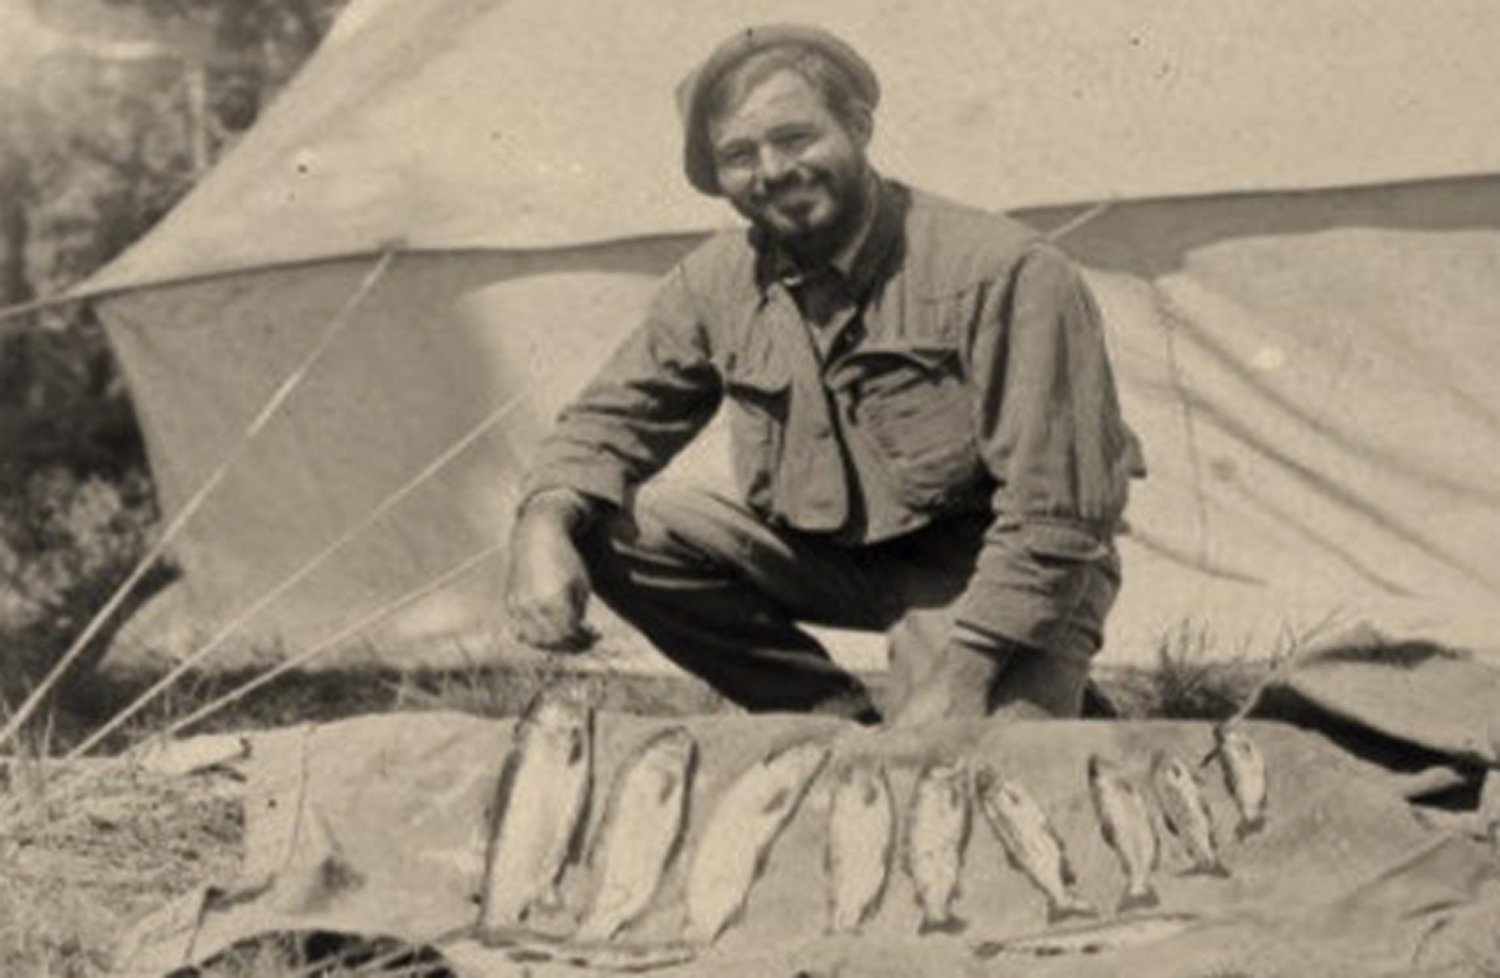 A habitual list keeper, Hemingway, shown here in Wyoming, noted everything from fish caught to pages written, which Worden used effectively in “Cockeyed Happy” and discussed on the One True Podcast.